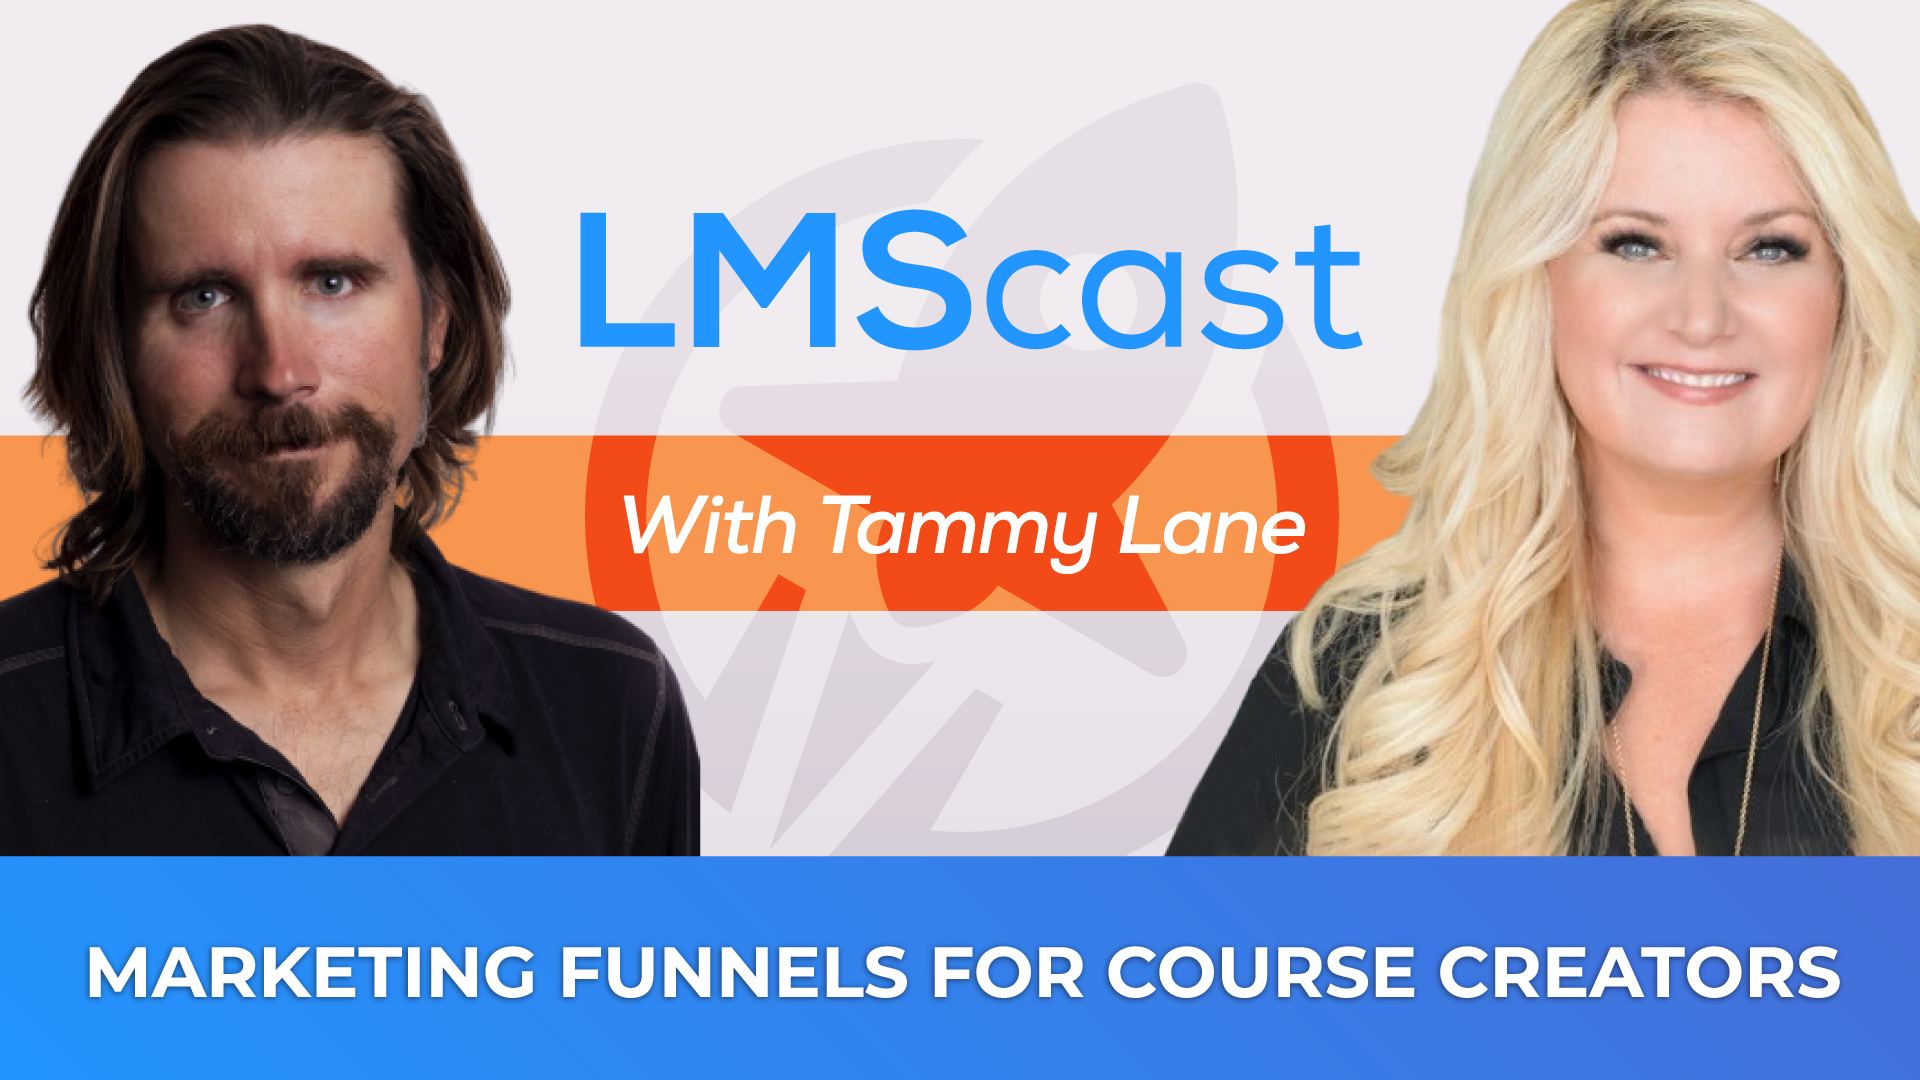 Marketing Funnels for Course Creators with Tammy Lane